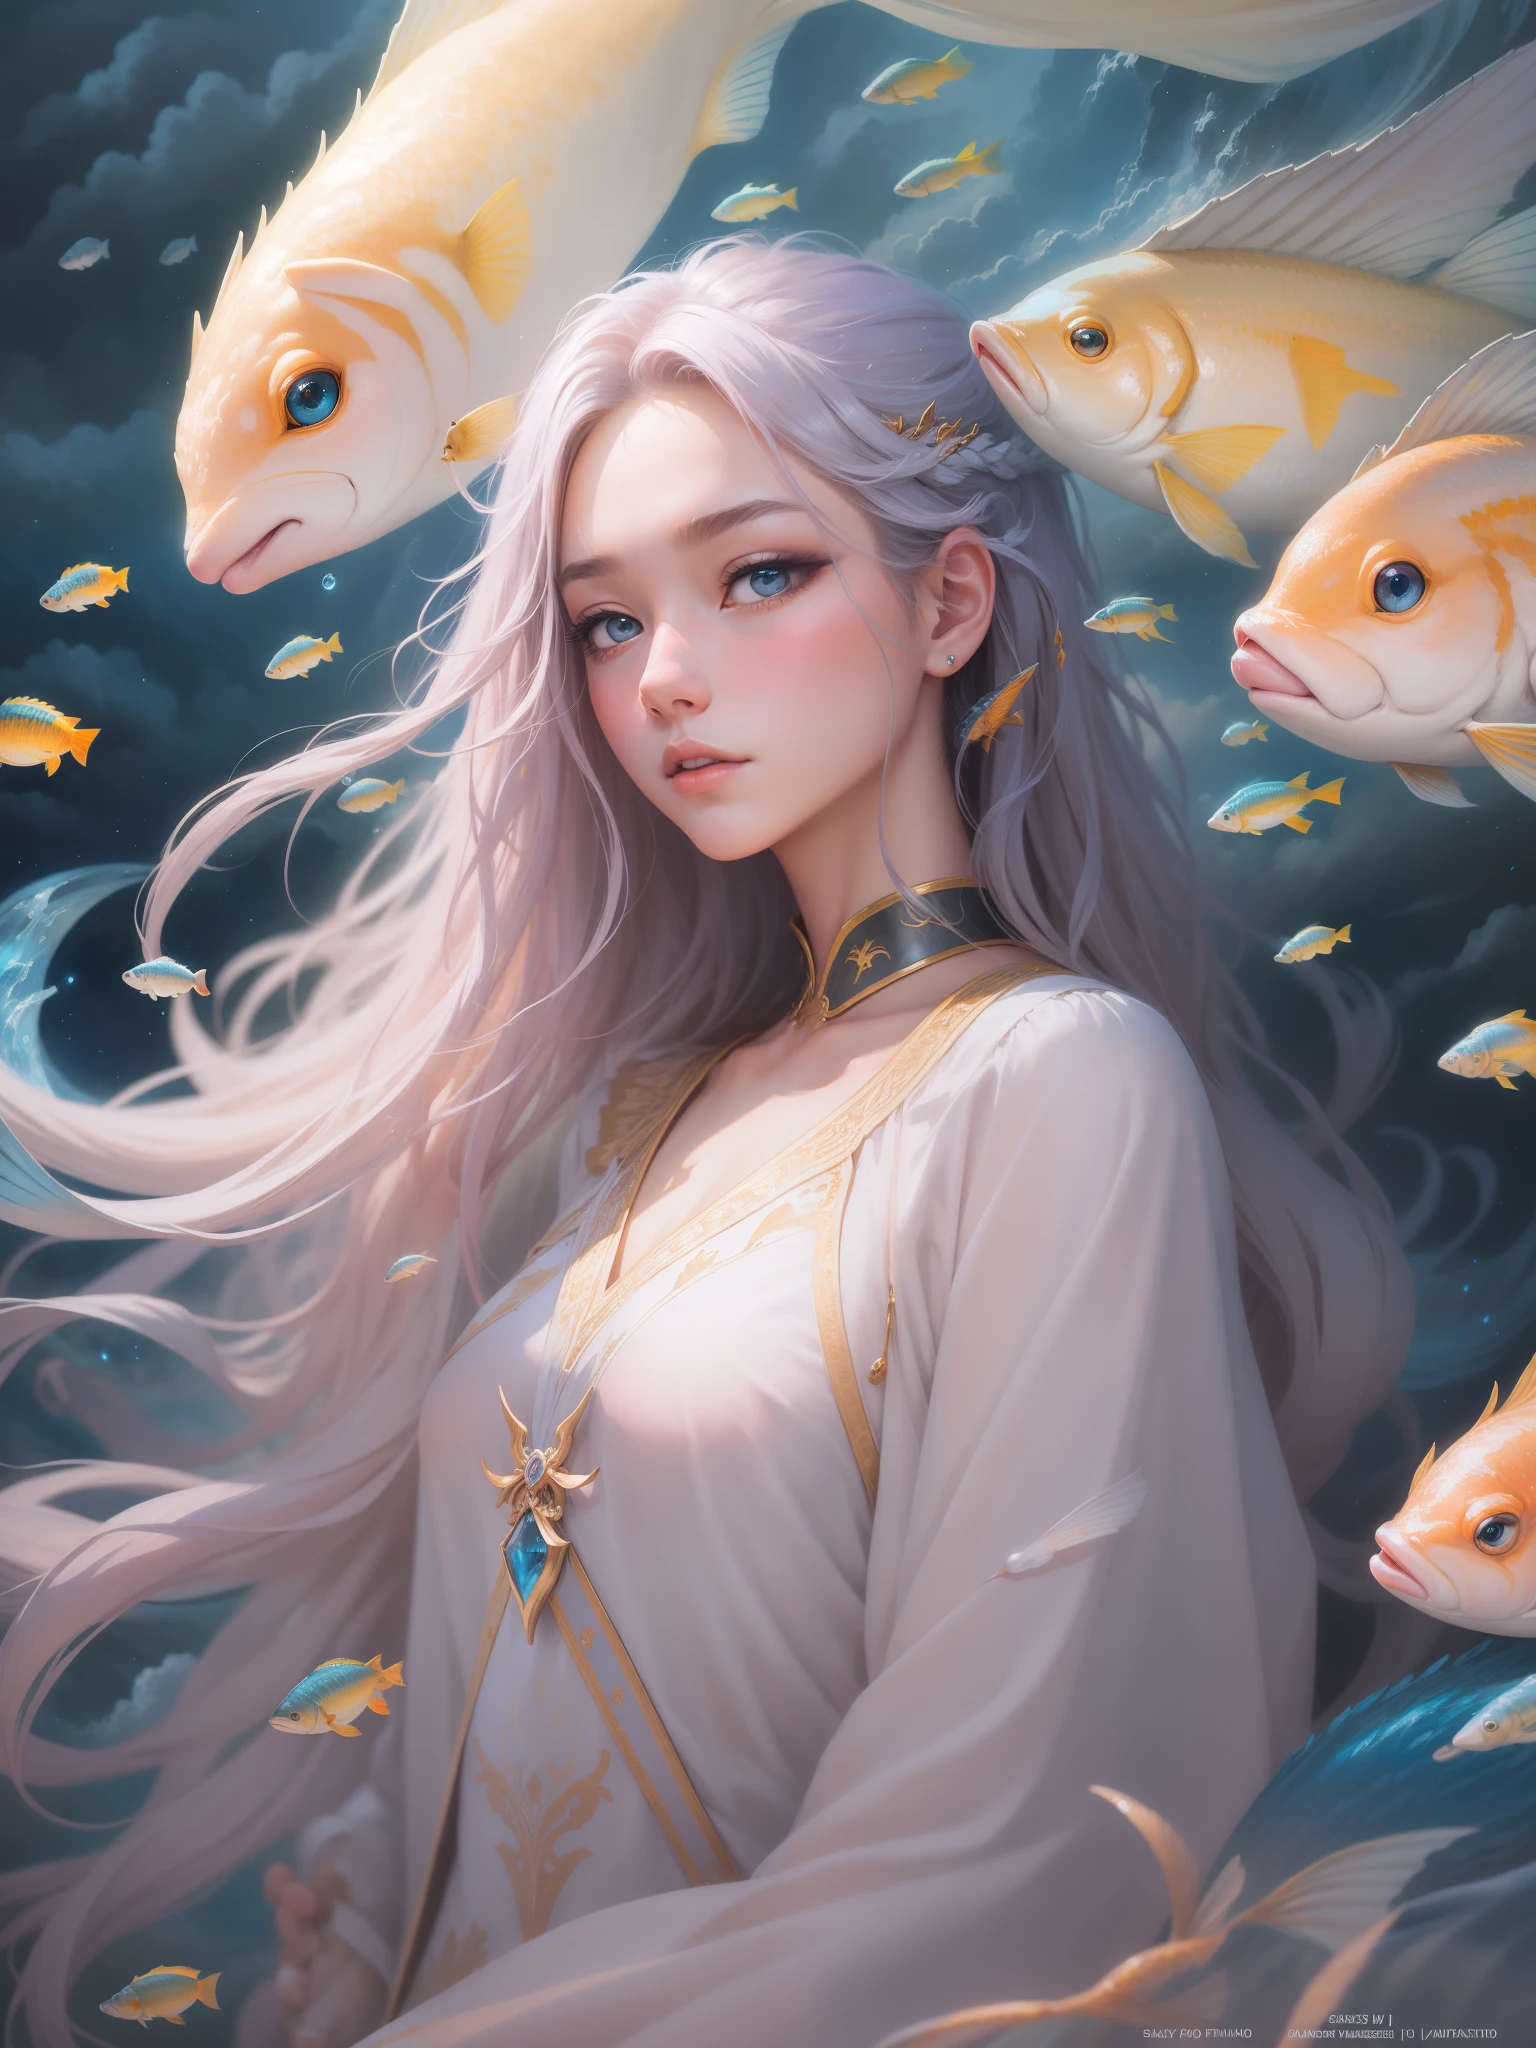 （tmasterpiece，official art aesthetic）。an oil painting，Oil brush strokes，Fantasyart：1.37，sky picture above,Fluffy clouds：1.37， （sad cloud goddess：1.37, The eyes are bright，Light-colored hair，Delicatemakeup，Glowing skin，Tulle clothes，Schools of fish surround her：1.37），Contre-Jour，Guviz style artwork, fantasy art style, In Baiyun Wonderland, beautiful fantasy art portrait